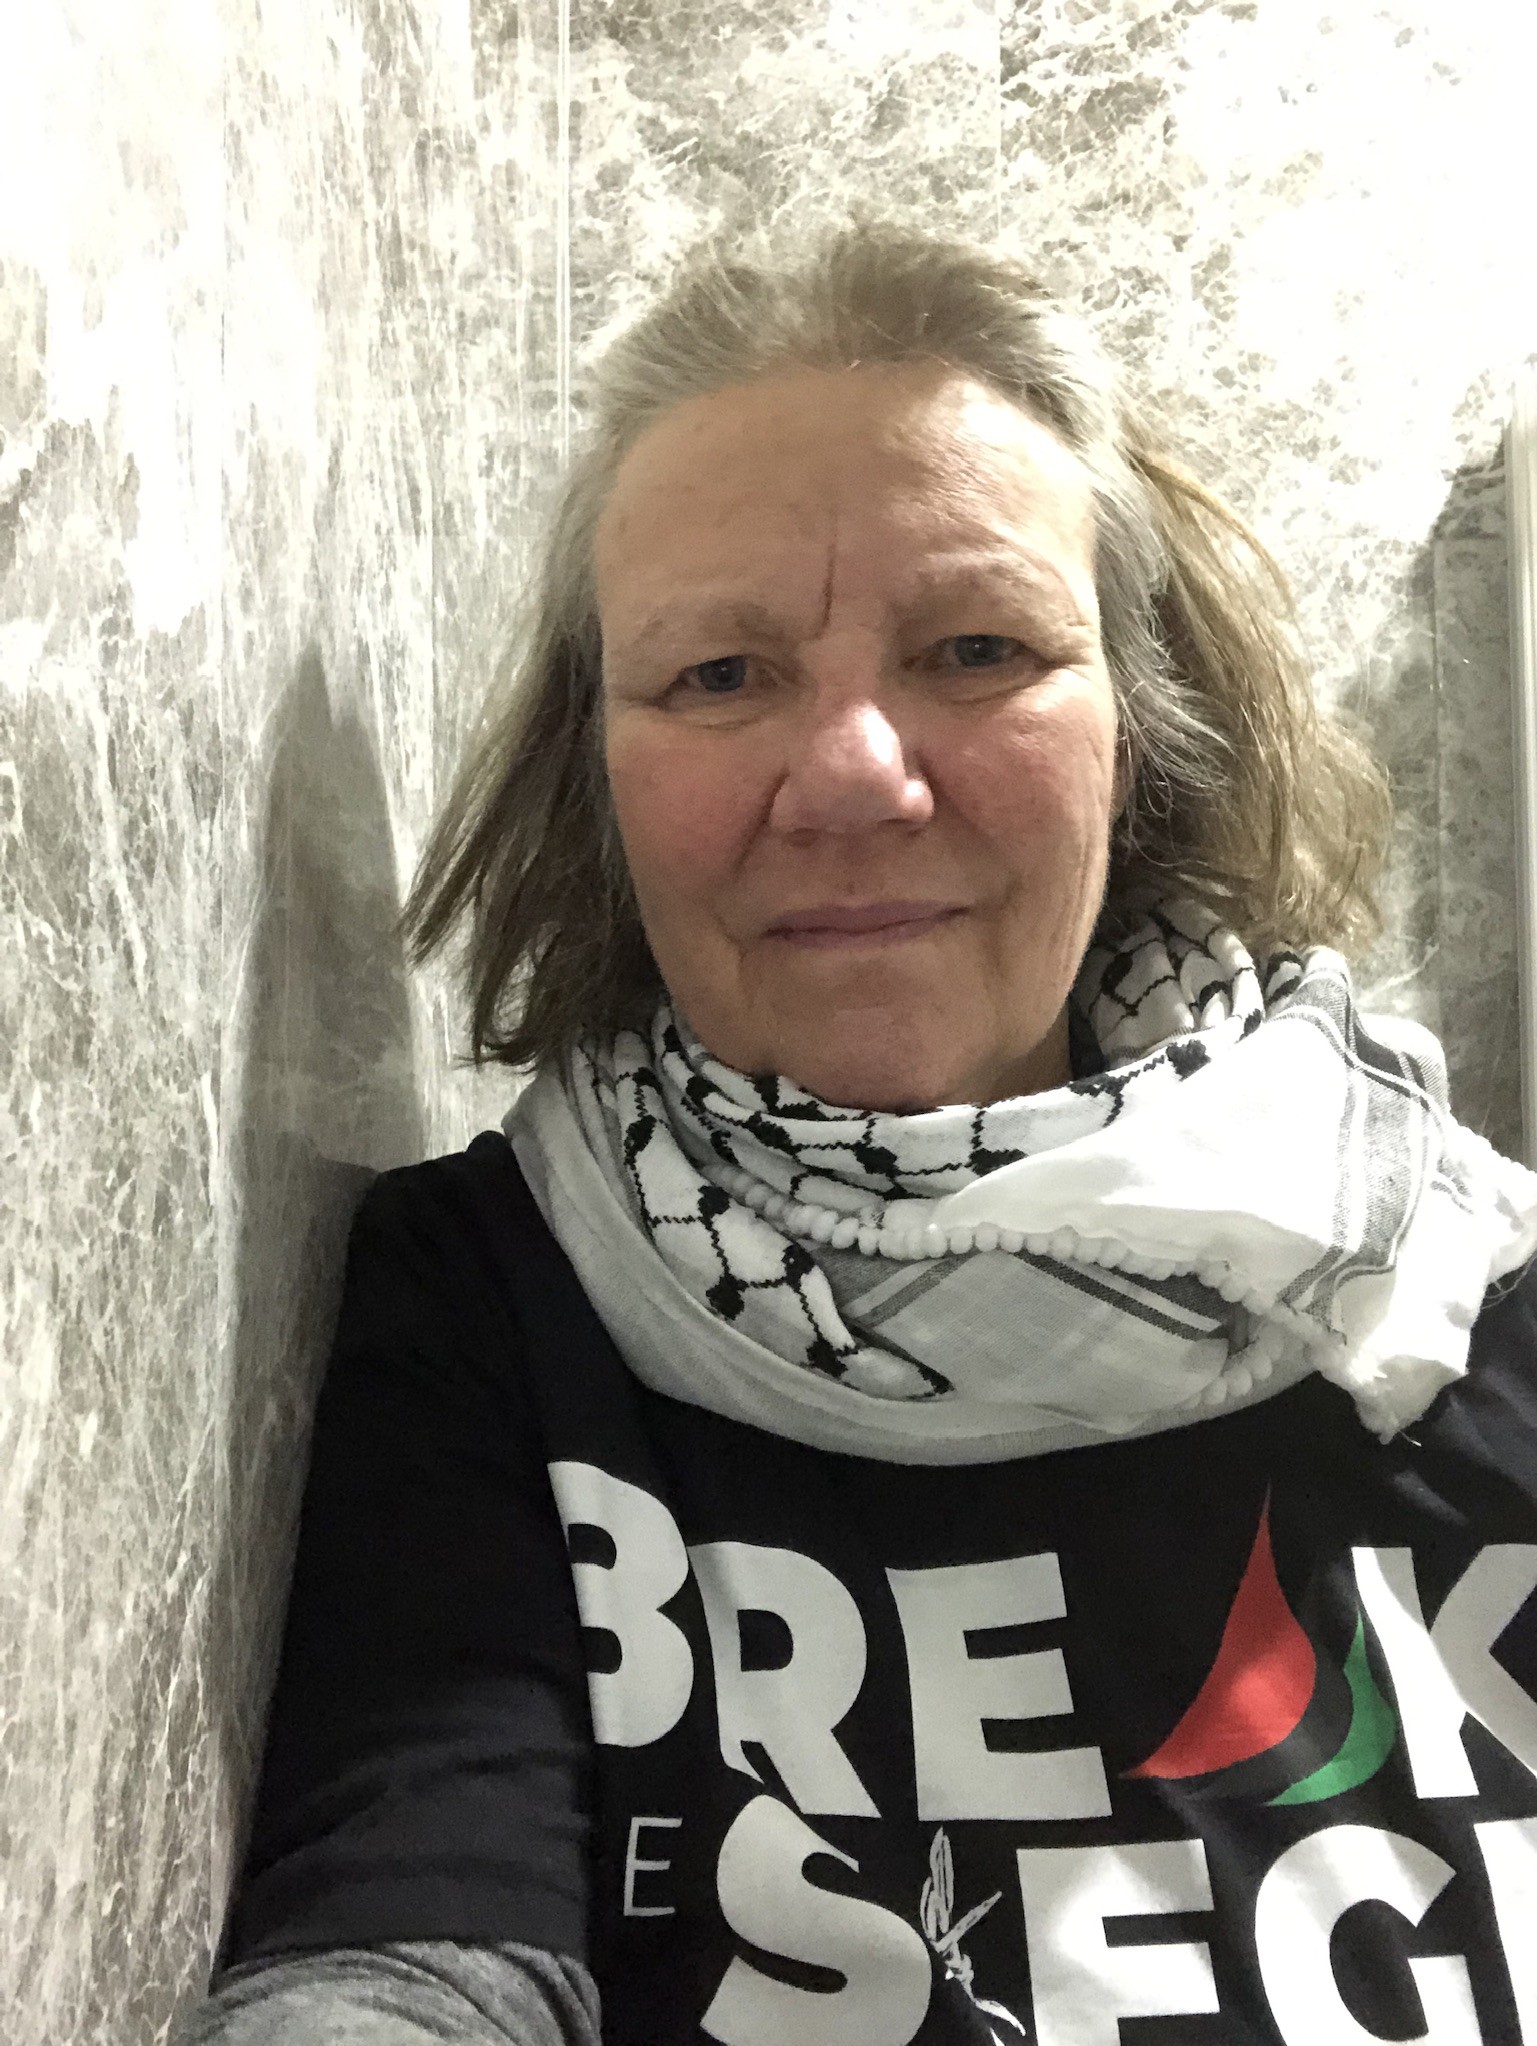 A woman looks directly at the camera while wearing a white and black scarf and a shirt reading "Break the Siege"